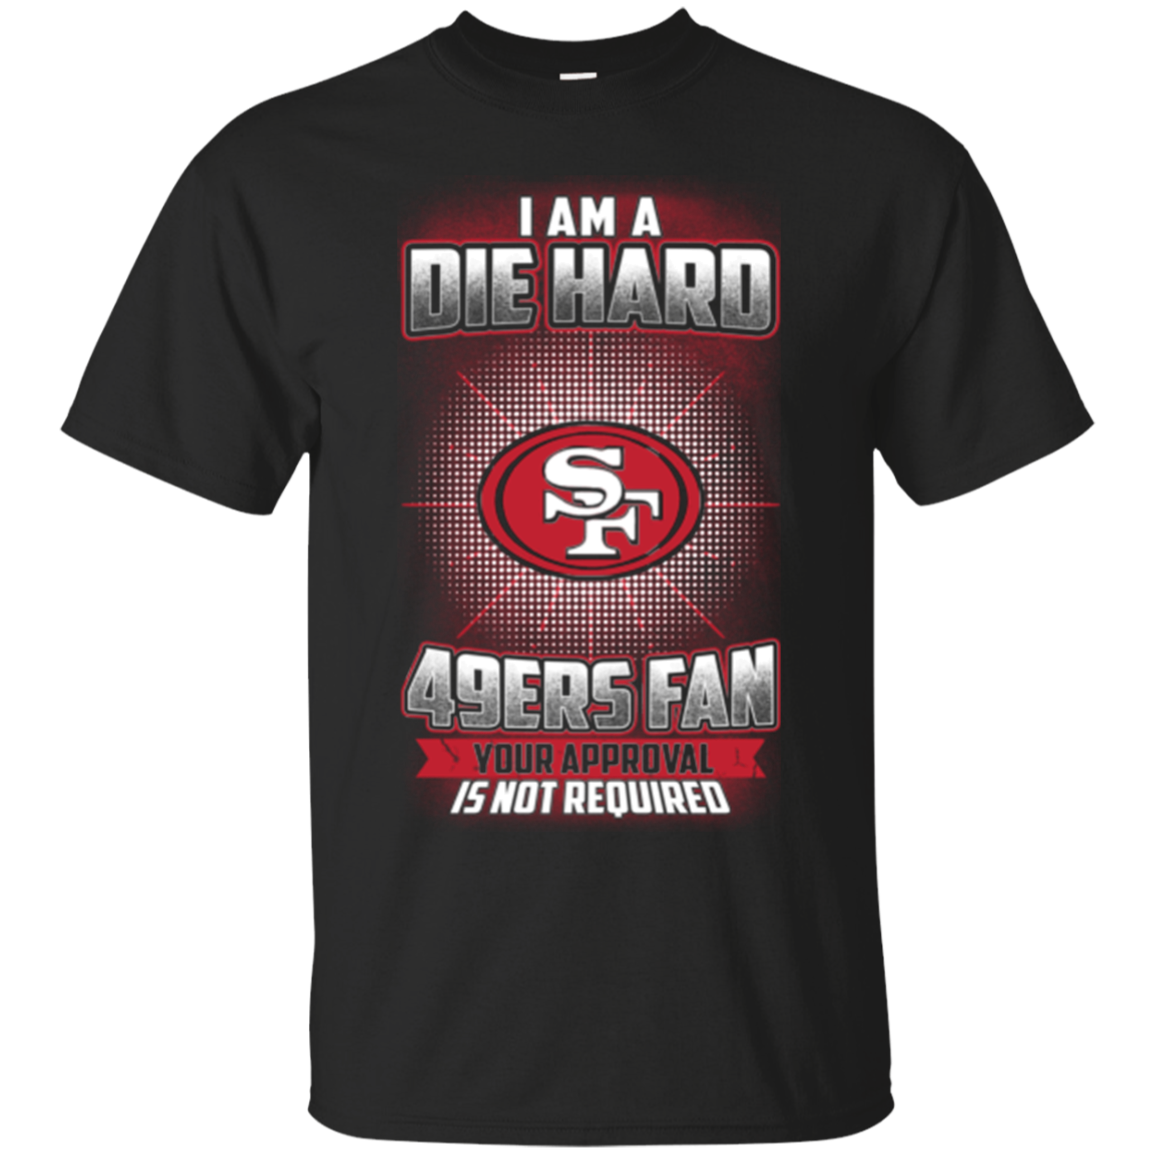 Die Hard 49ers Fan Your Approval Not RequiredSan Fransisco 49ers Shirts ...